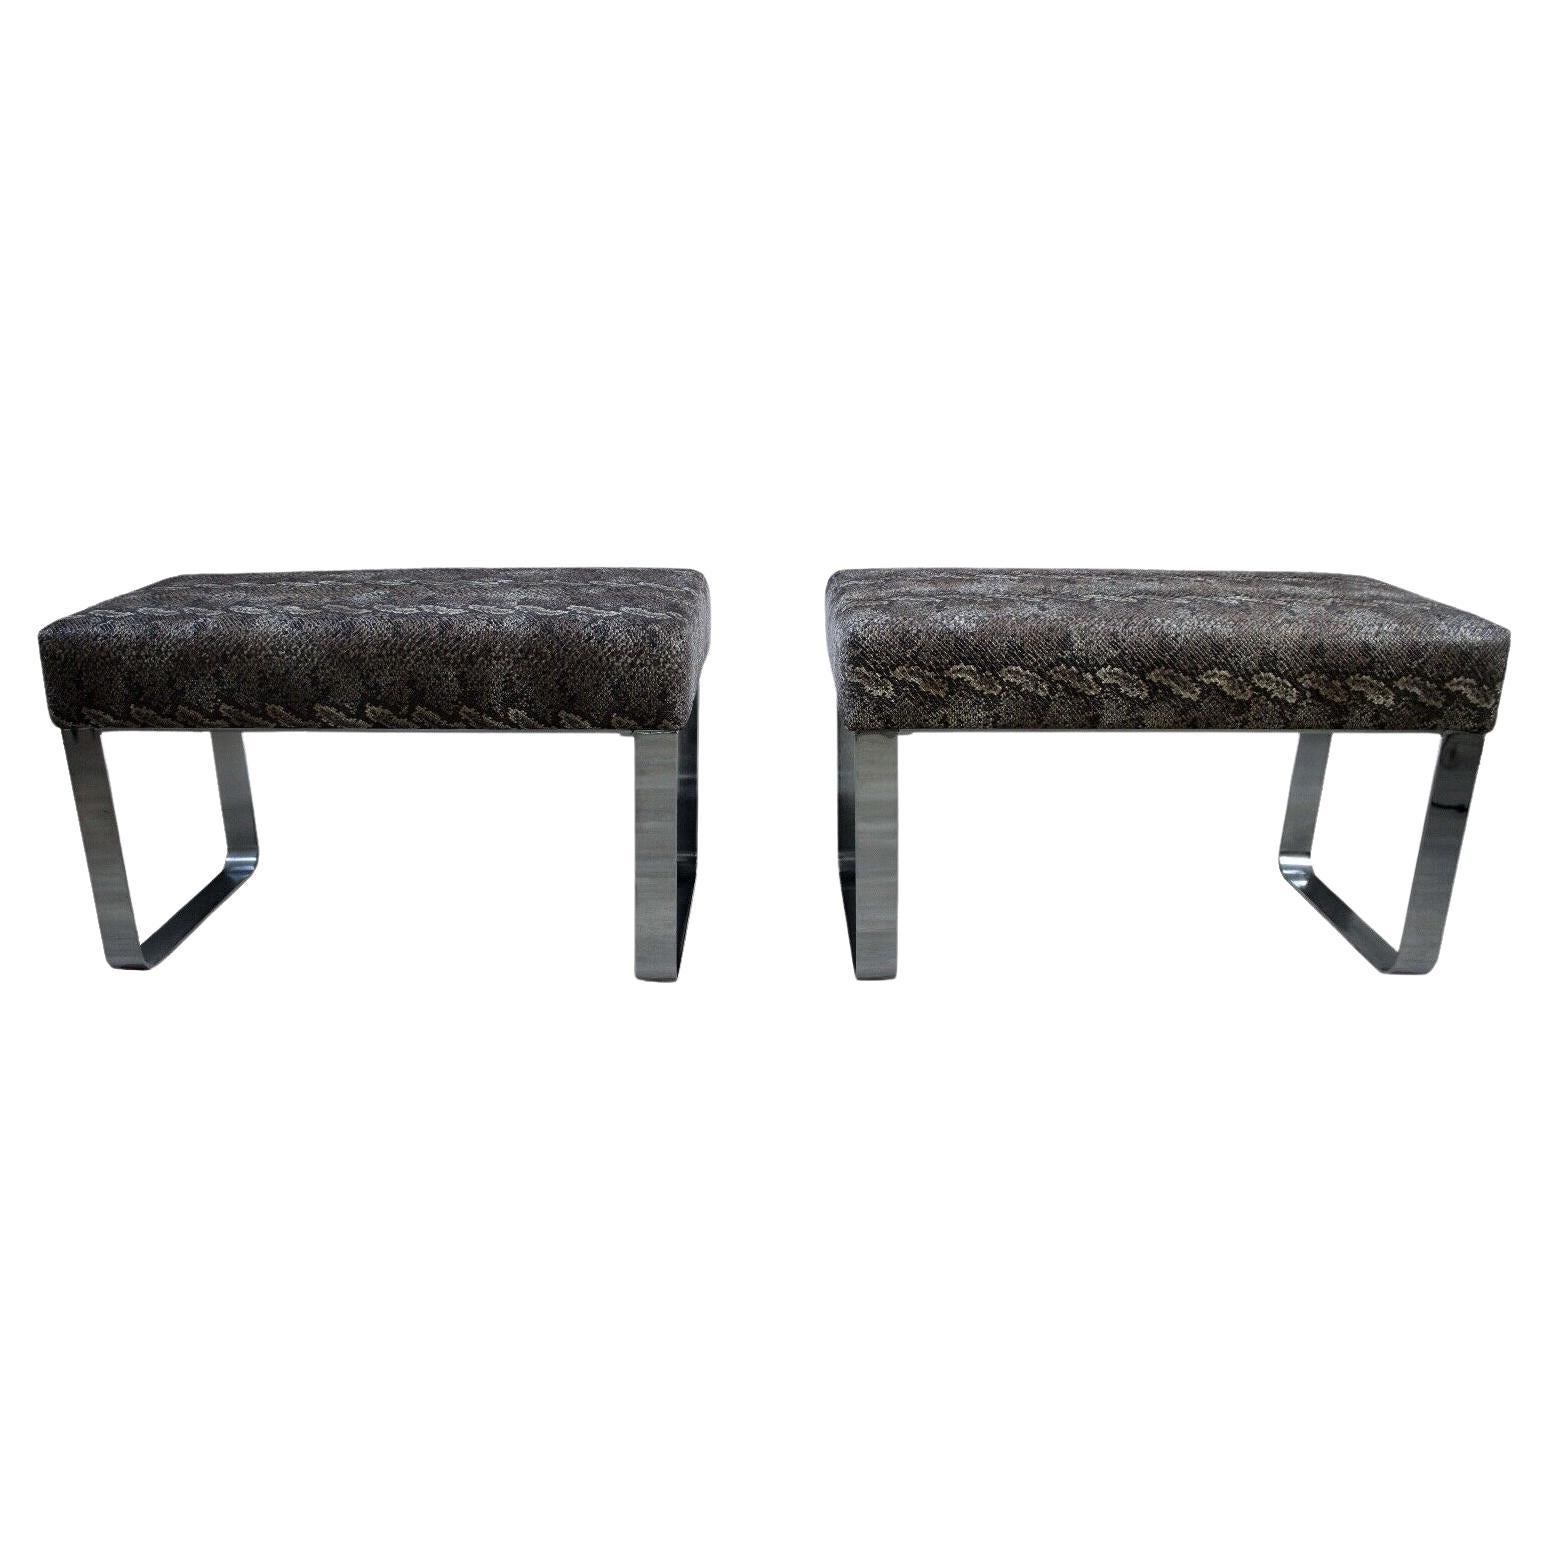 Faux Python and Chrome Covered Parsons Ottomans Contemporary Modern